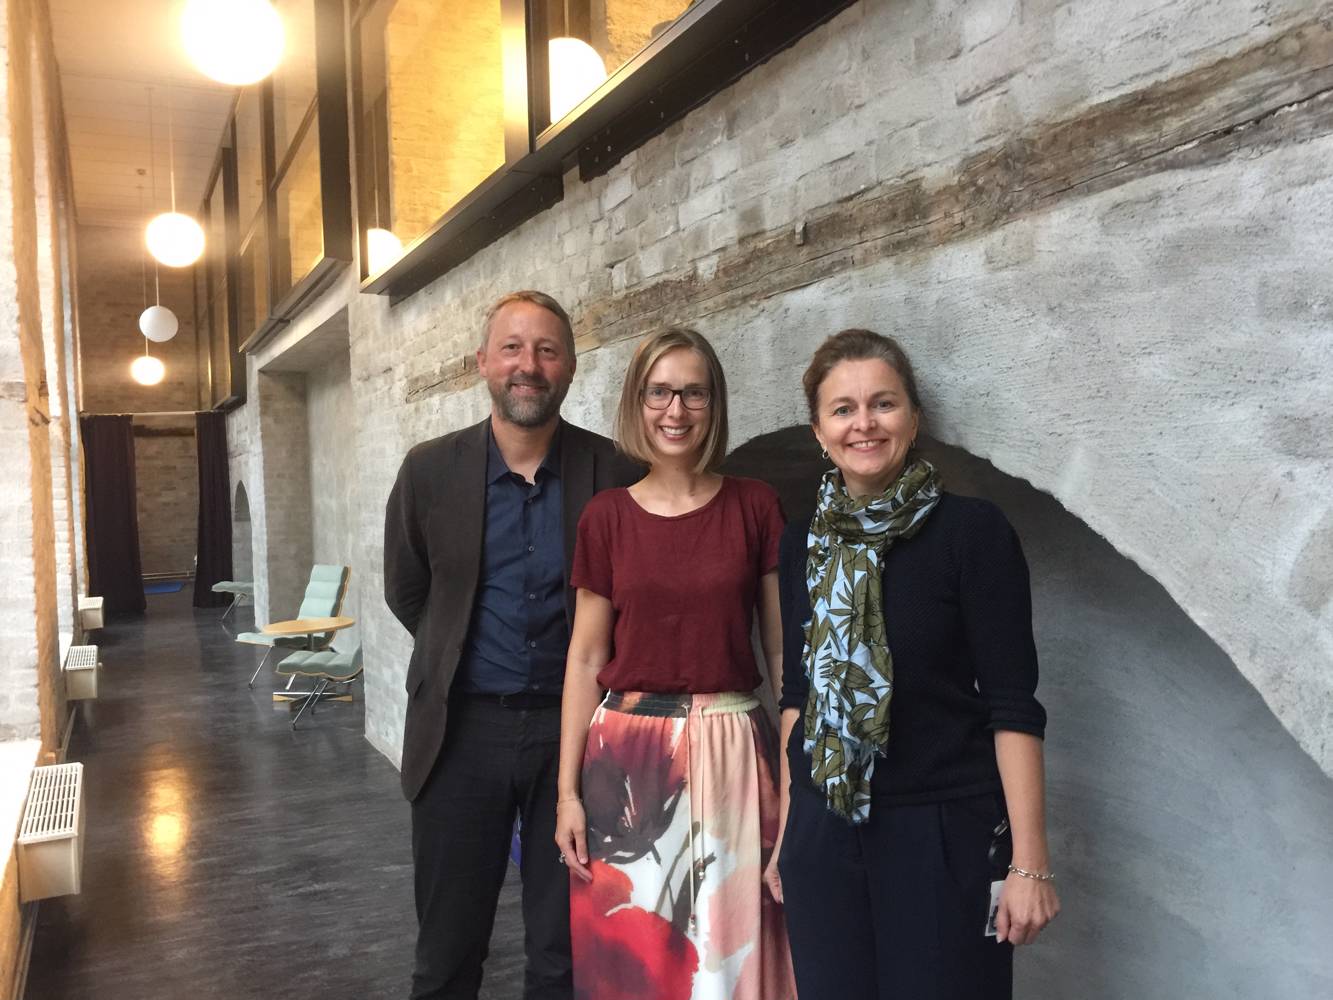 The Minister of Research and Education in Norway visited PRIO August 2018. Gee Berry / PRIO